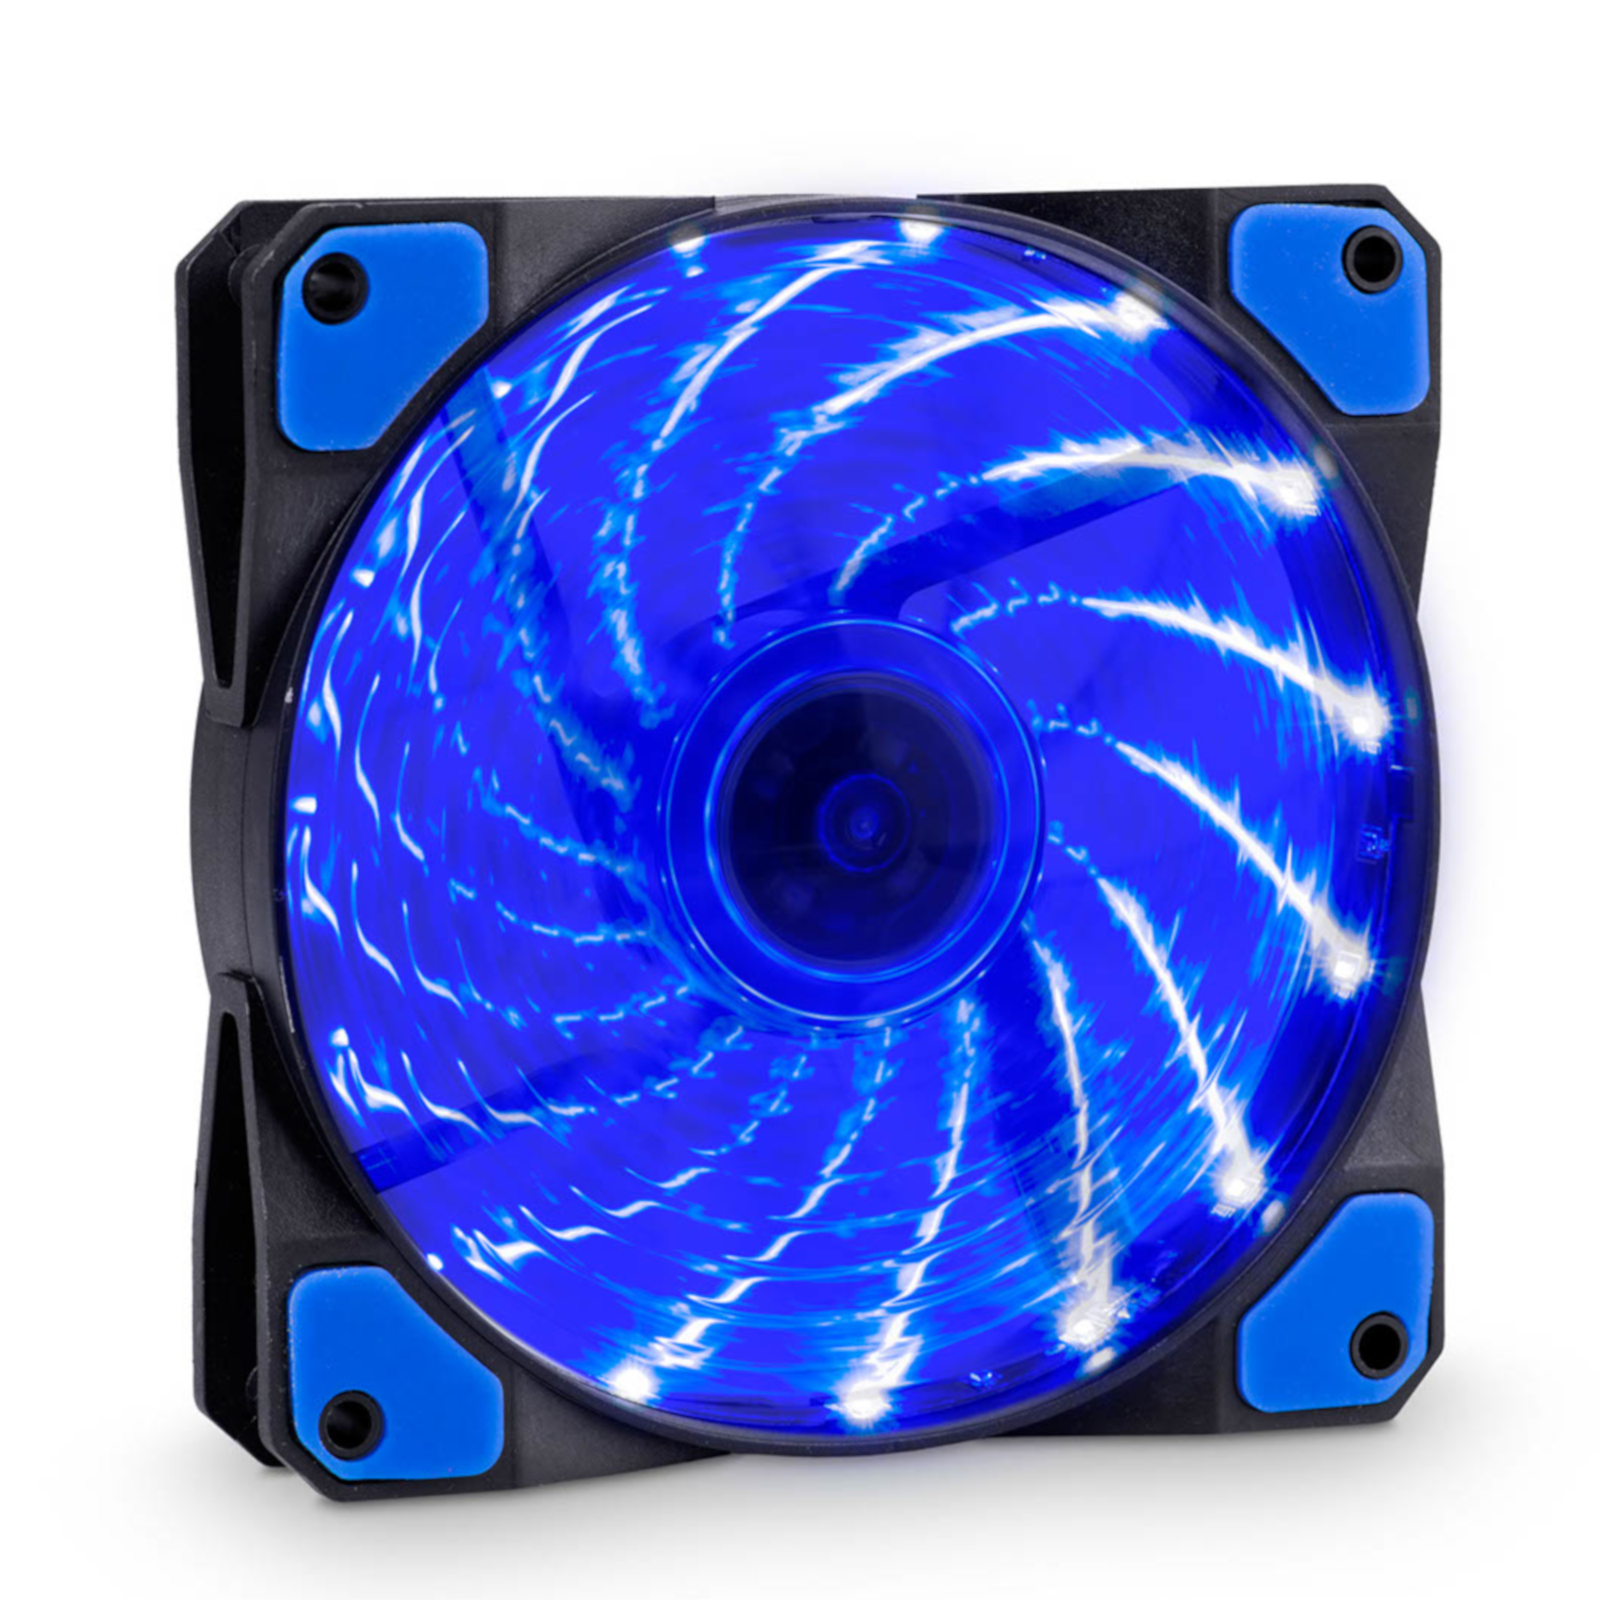 120mm fan with molex connector